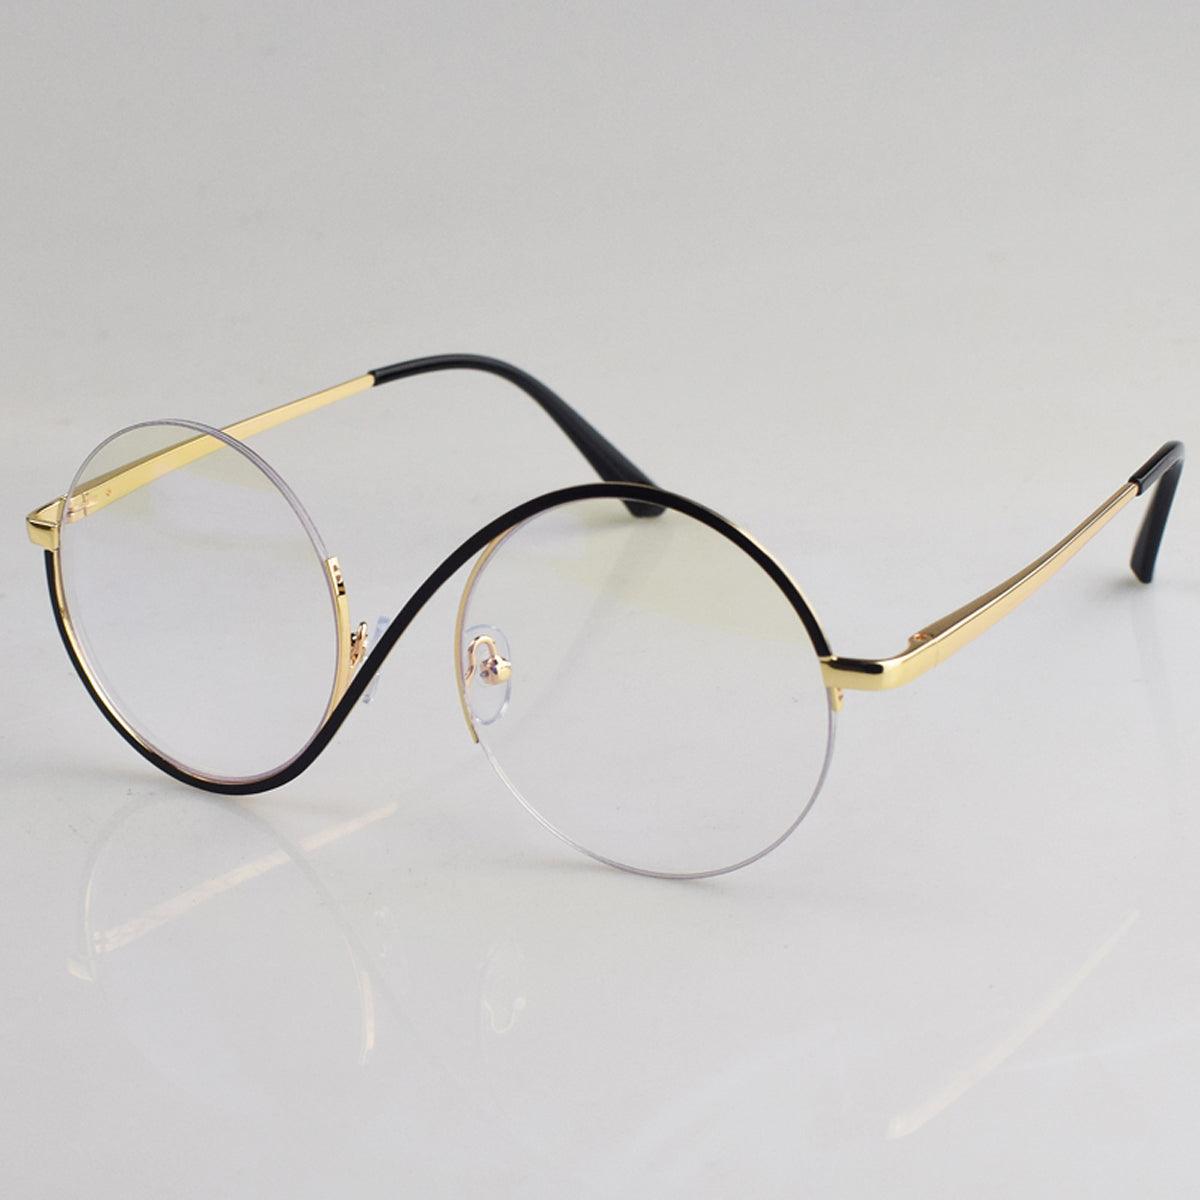 S Frame Curved Round Glasses - Aesthetic Clothes Shop